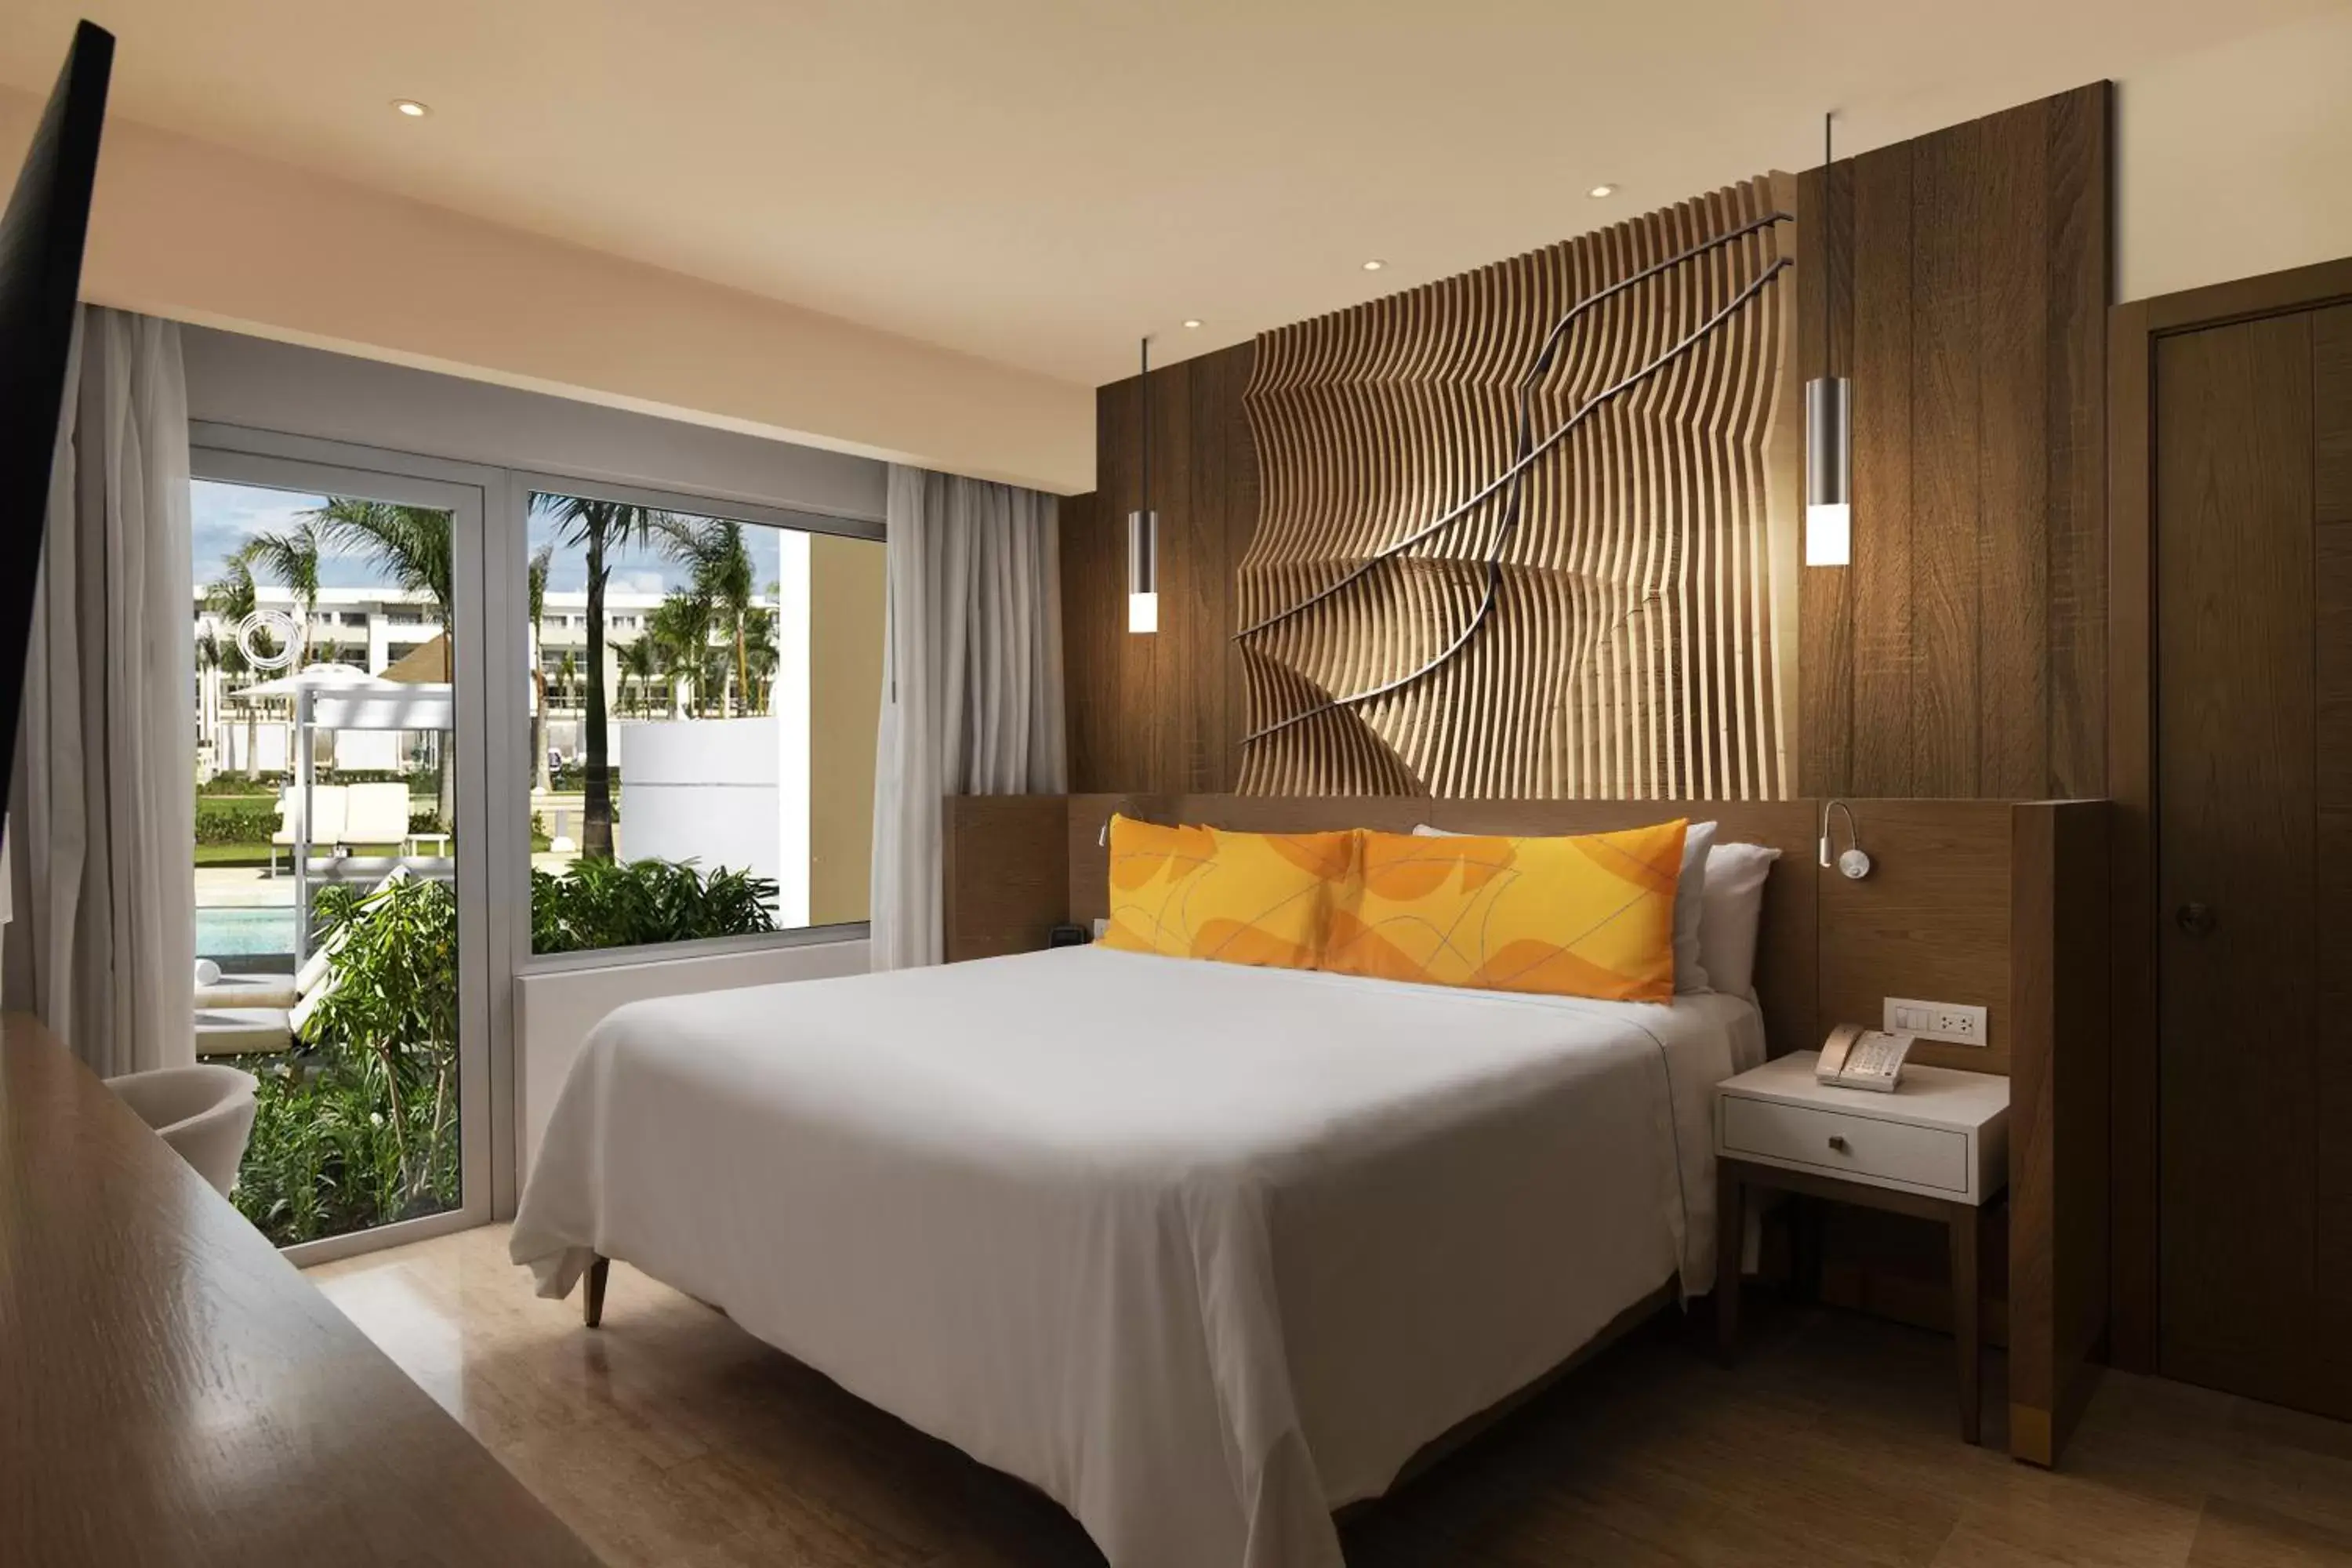 Beyond Master Suite Swim - Up in Falcon's Resort by Melia, All Suites - Punta Cana - Katmandu Park Included